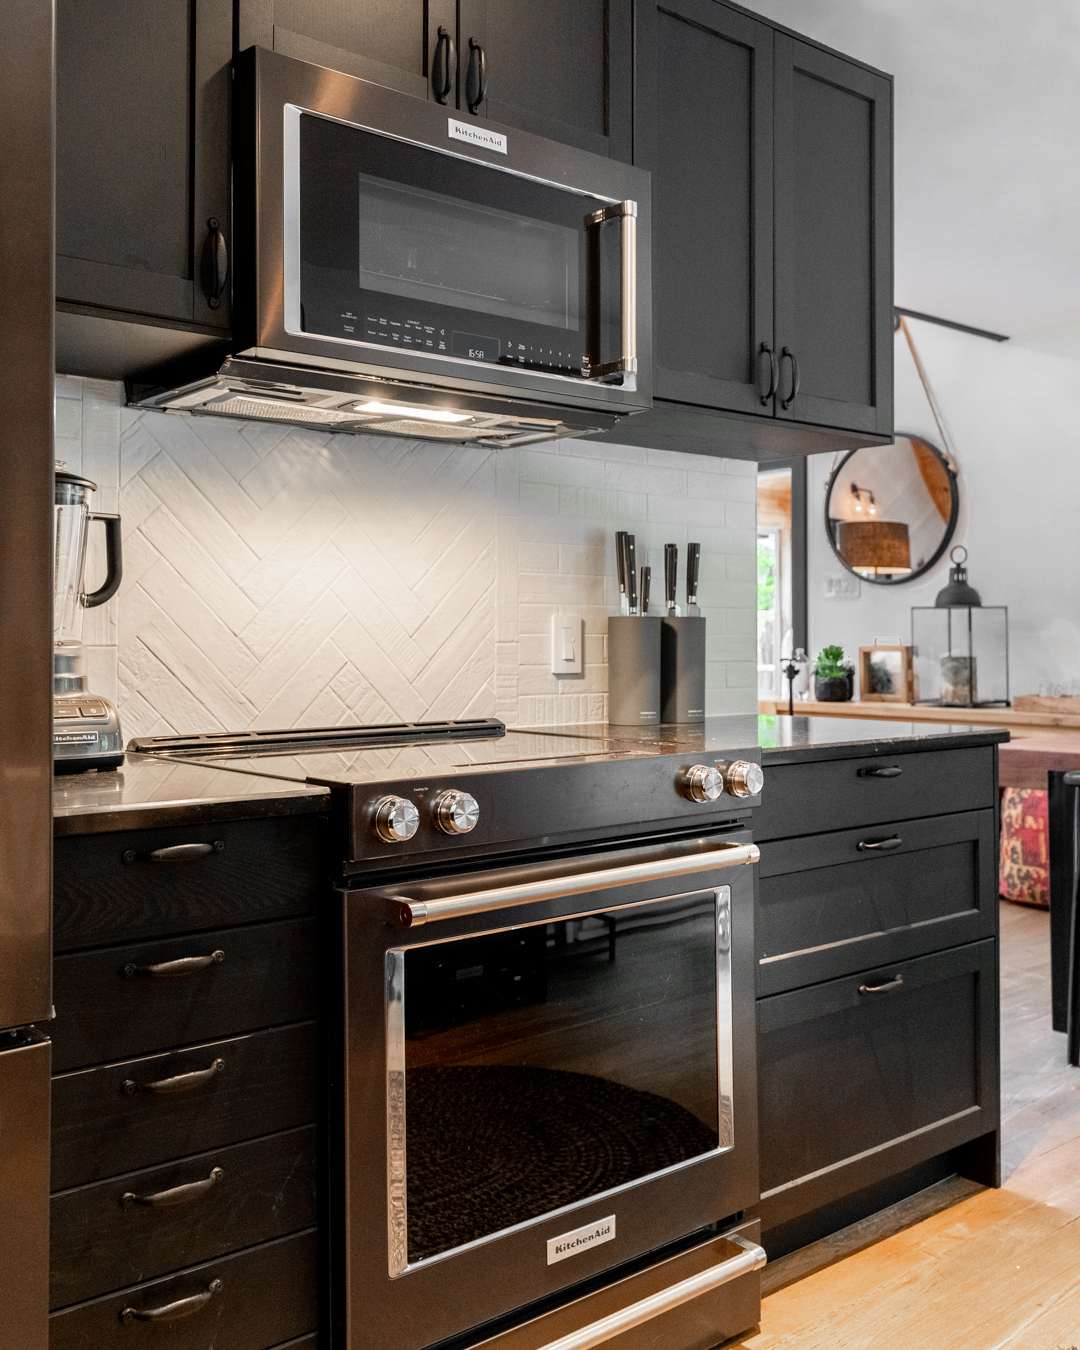 black kitchen cabinetry, Kitchenaid stove and microwave above